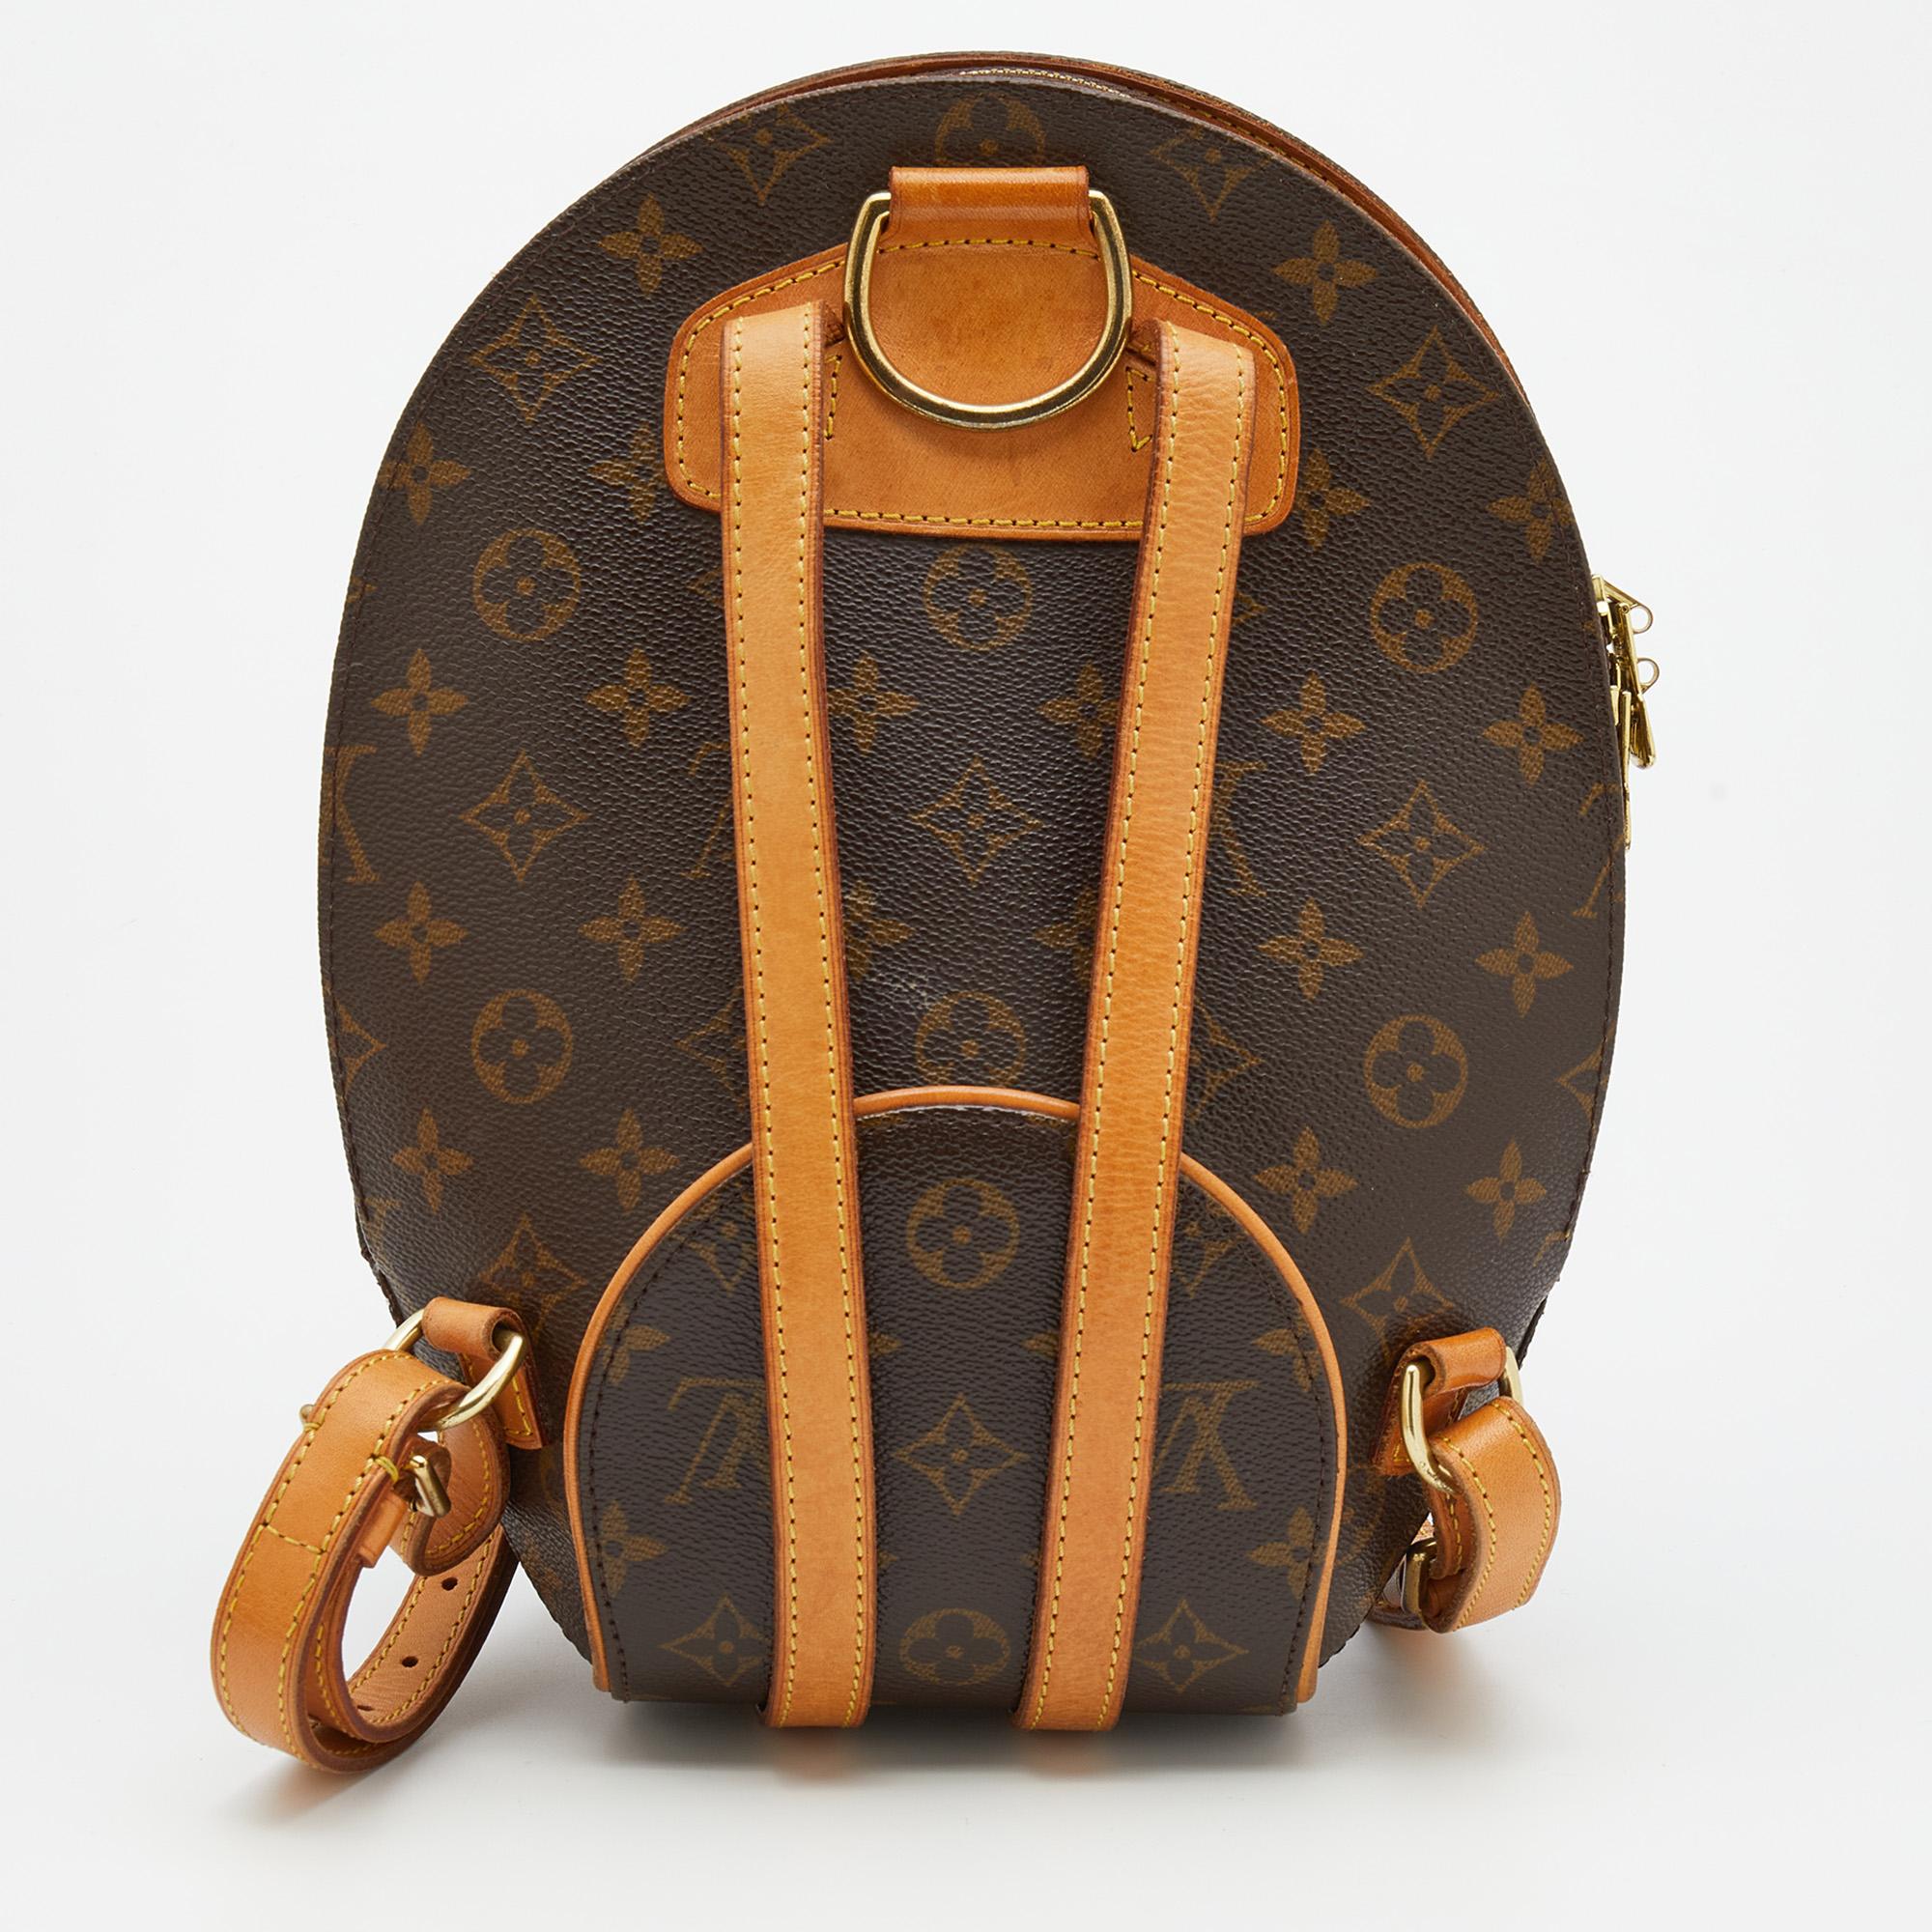 For days of ease and fashion, Louis Vuitton has created this classy Ellipse Sac a Dos backpack. It is crafted using Monogram canvas on the exterior. It shows gold-tone hardware and a canvas-lined interior. It comes with shoulder straps that can be